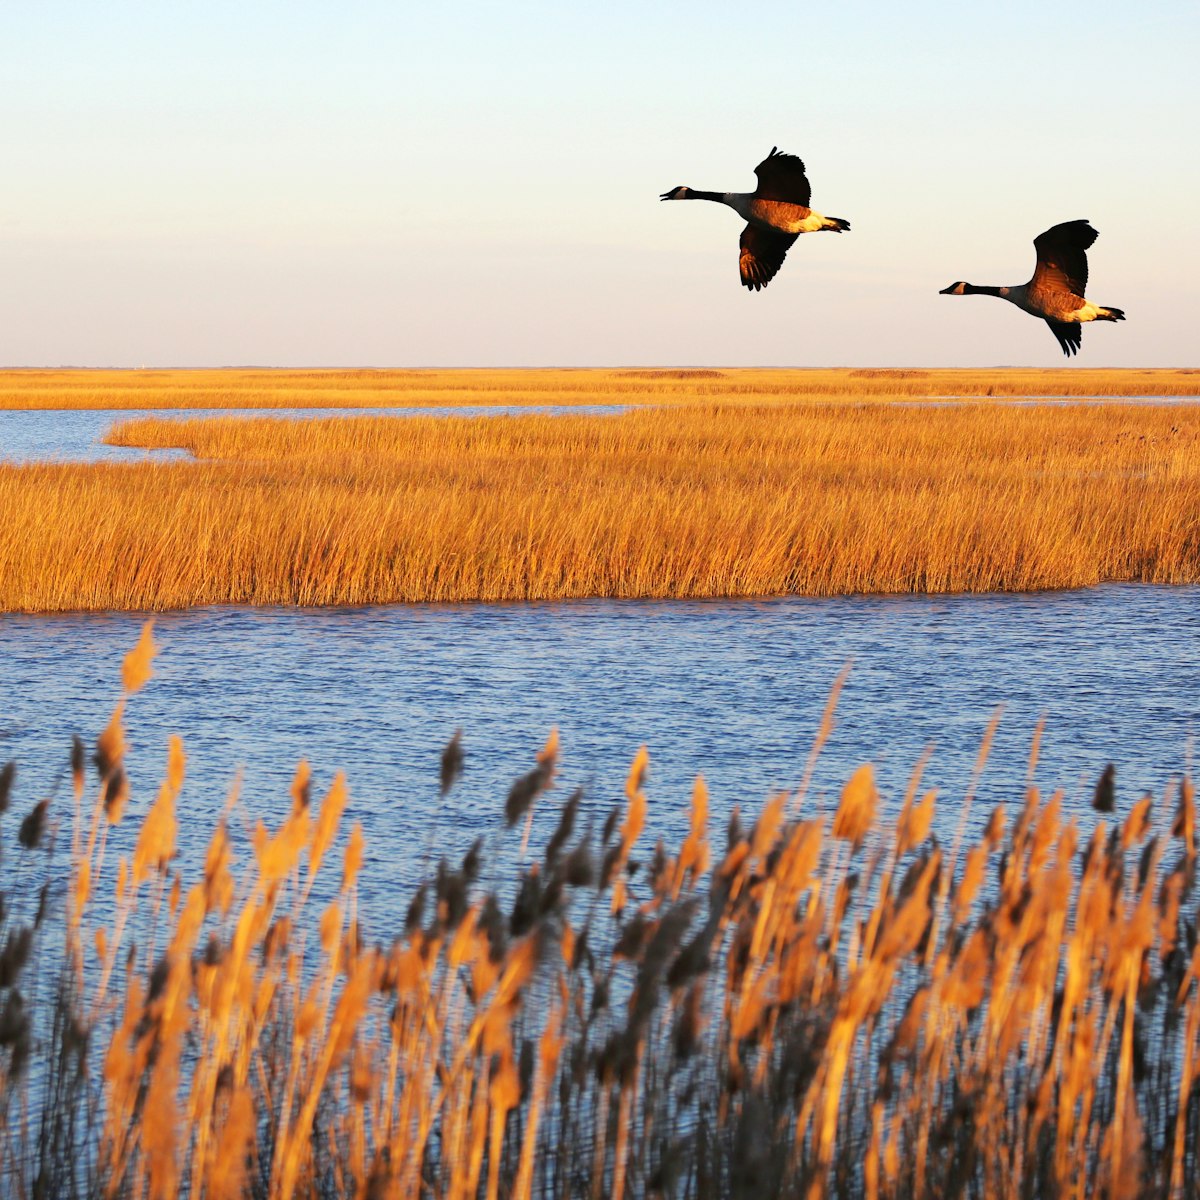 A couple of Canada geese in migration at Bombay Hook National Wildlife Refuge, Delaware.